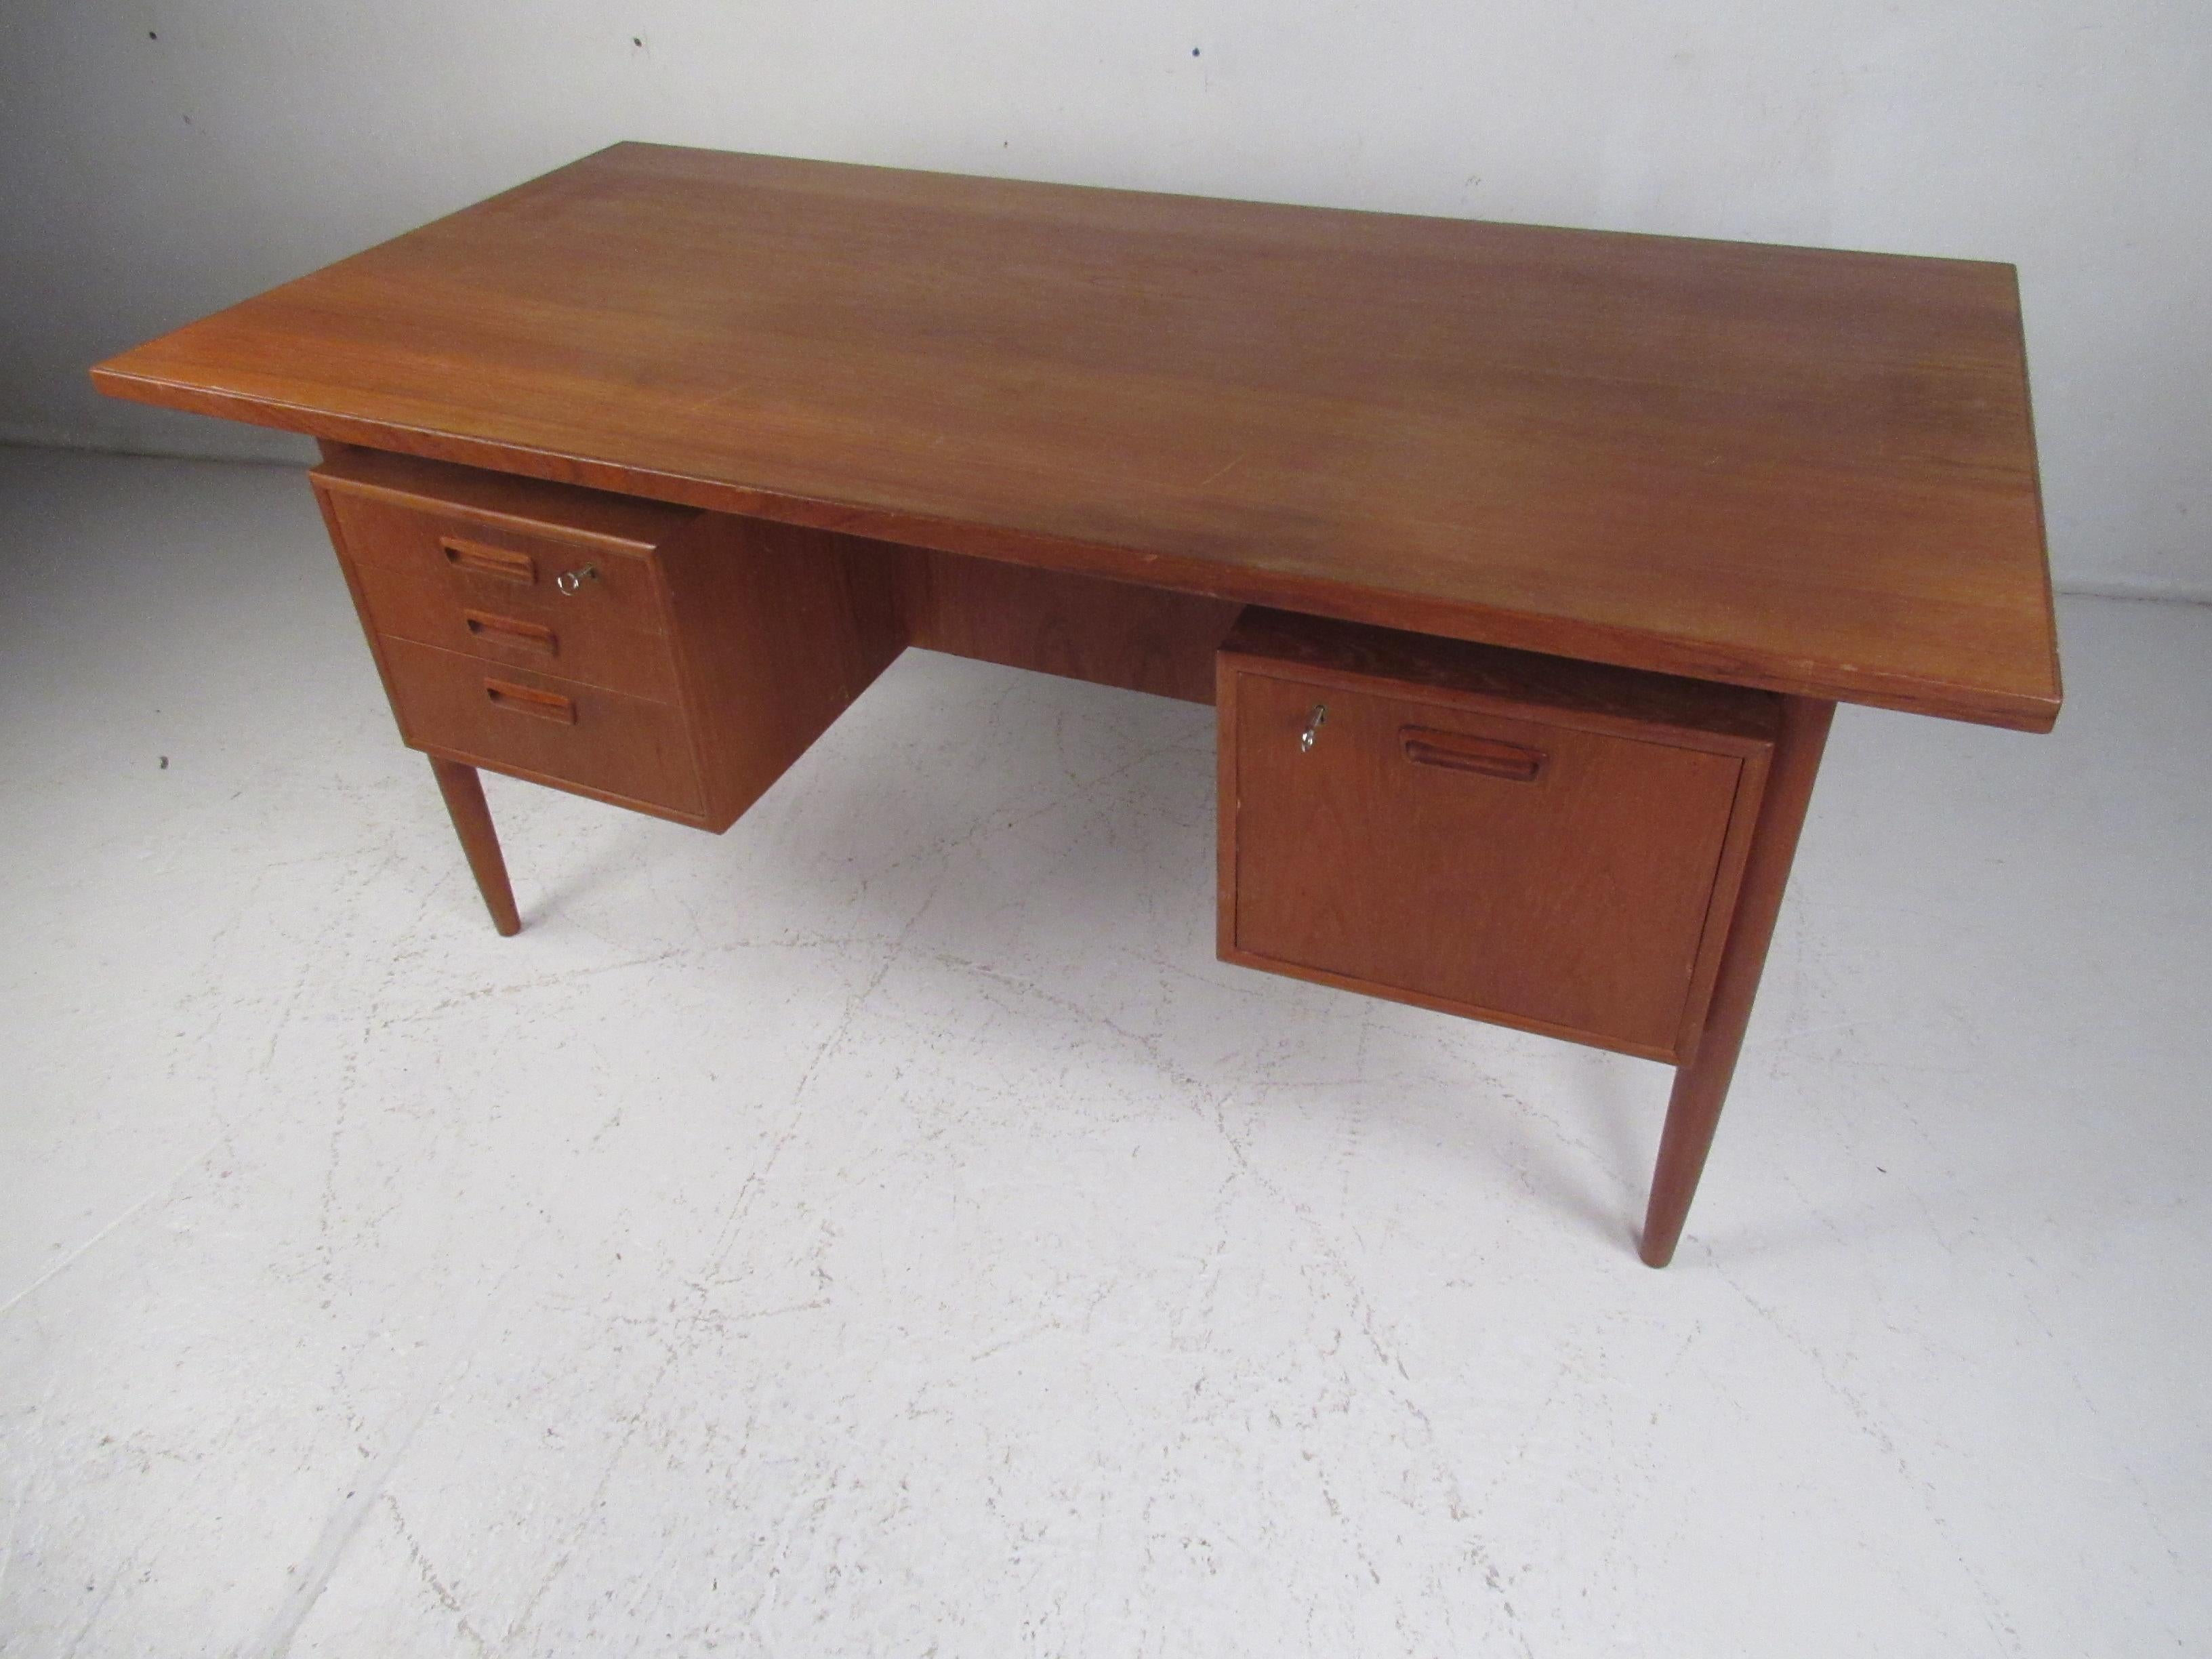 This sleek Mid-Century Modern desk features a twin pedestal base and a floating style top. A well-made Danish design that boasts four dovetailed drawers and a large tabletop ensuring plenty of work space. The carved drawer pulls, tapered legs, and